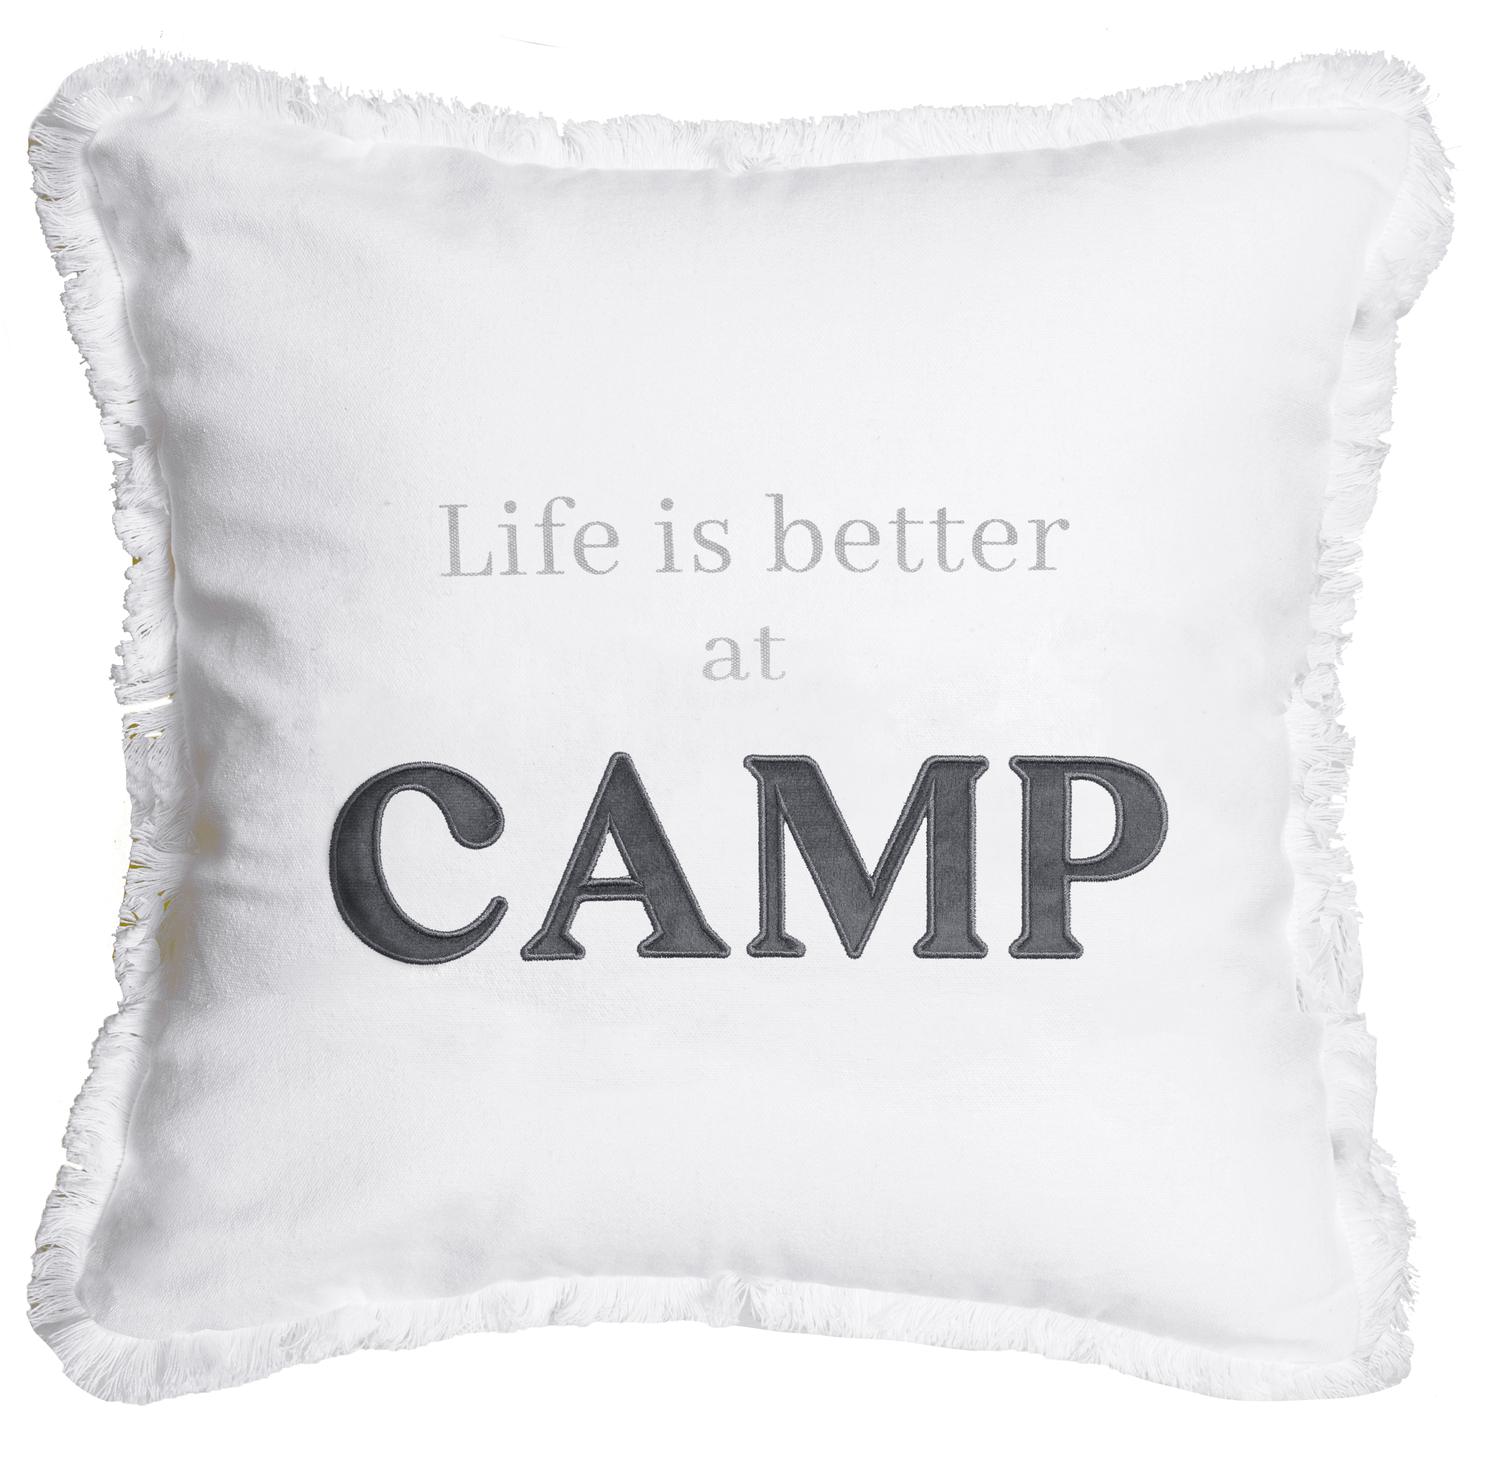 Camp by Tossing Words Around - Camp - 18" Throw Pillow Cover